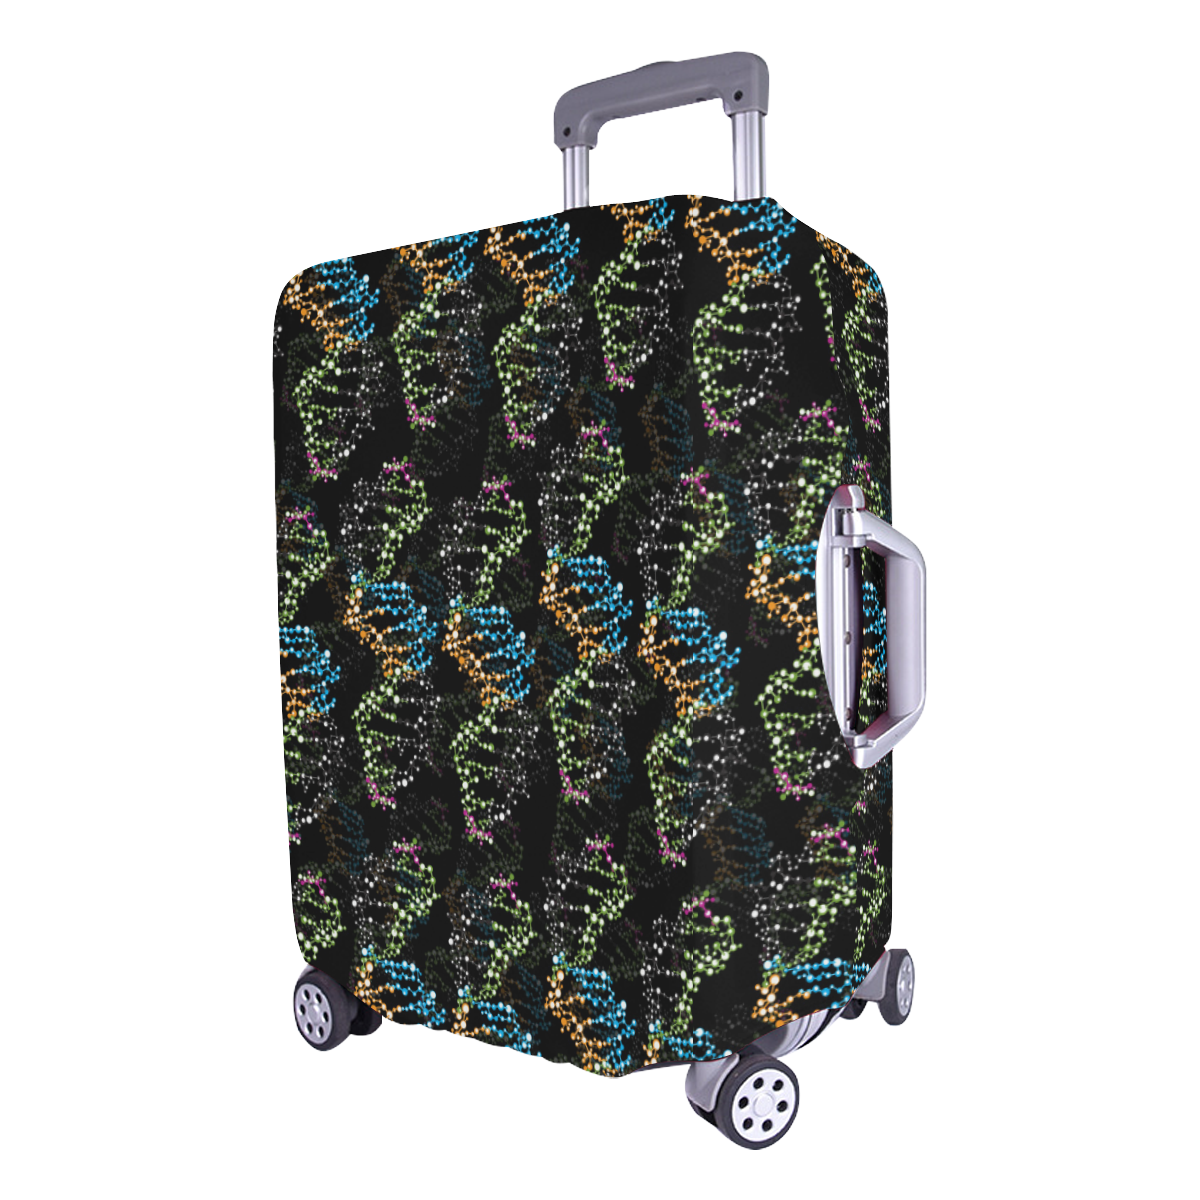 DNA pattern - Biology - Scientist Luggage Cover/Large 26"-28"